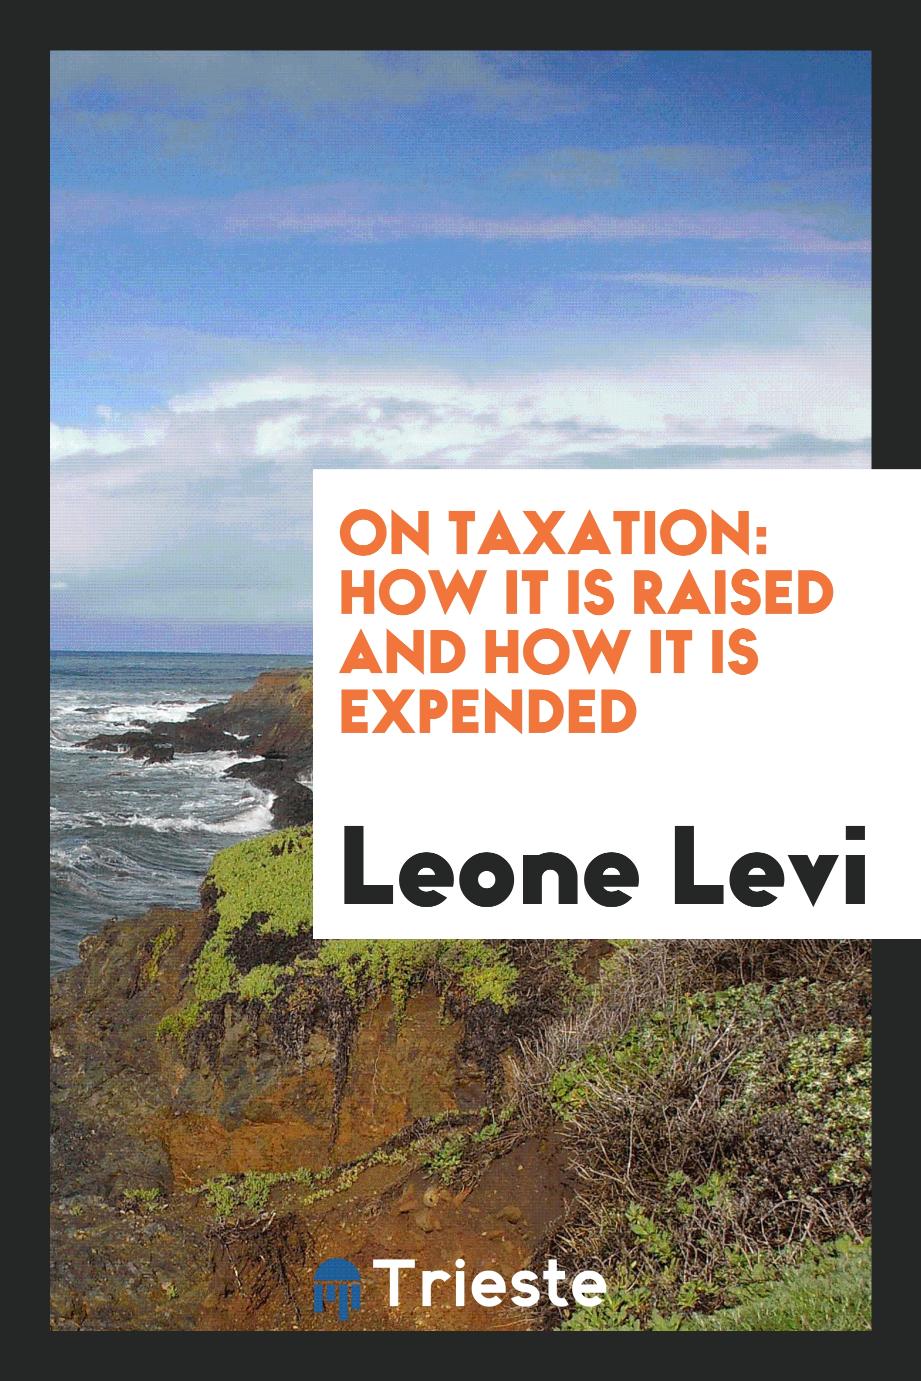 On taxation: how it is raised and how it is expended